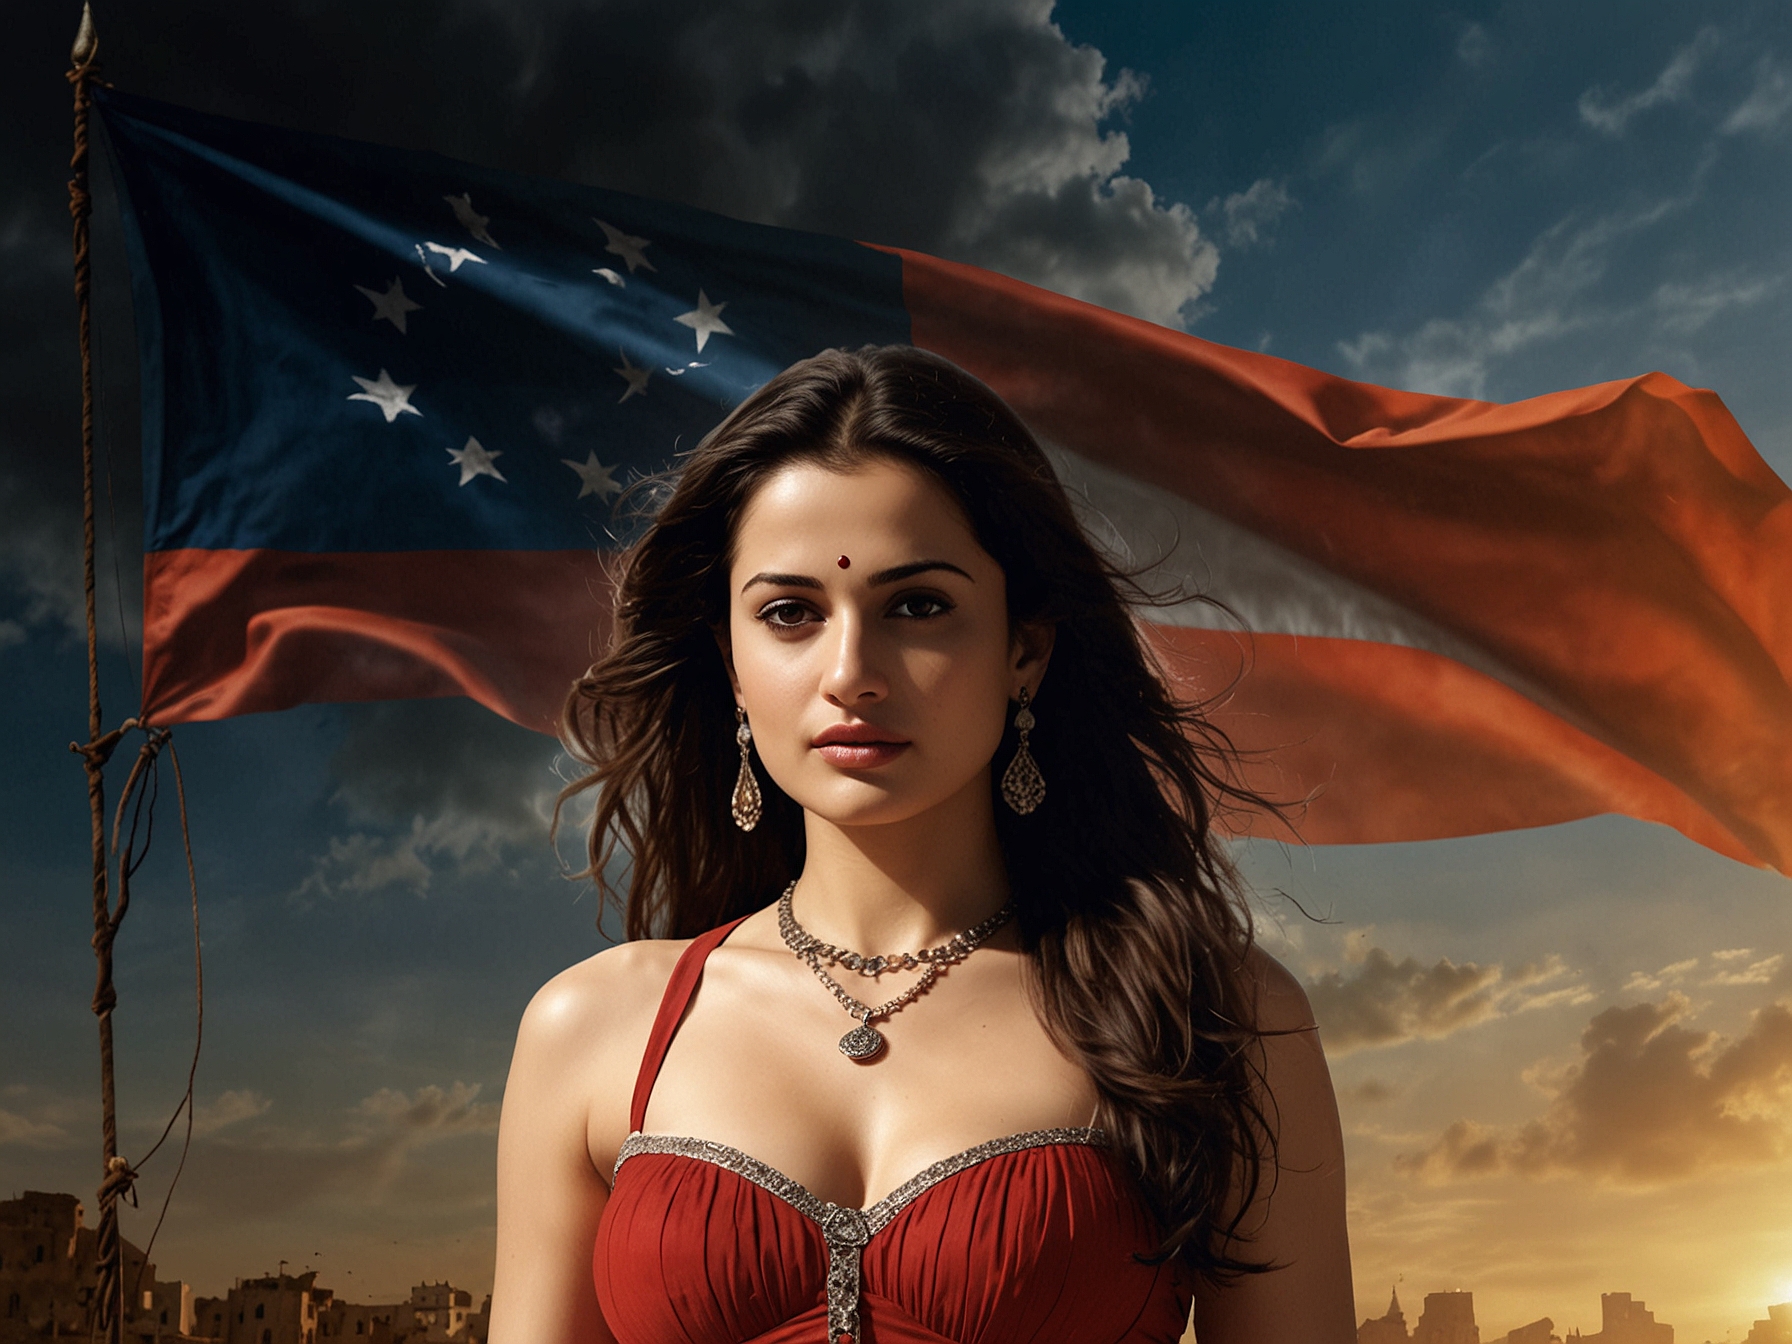 Ameesha Patel as Sakeena, standing confidently against a dramatic backdrop, symbolizing her demand for a substantial role in 'Gadar 3.' The image highlights her pivotal impact on the franchise.